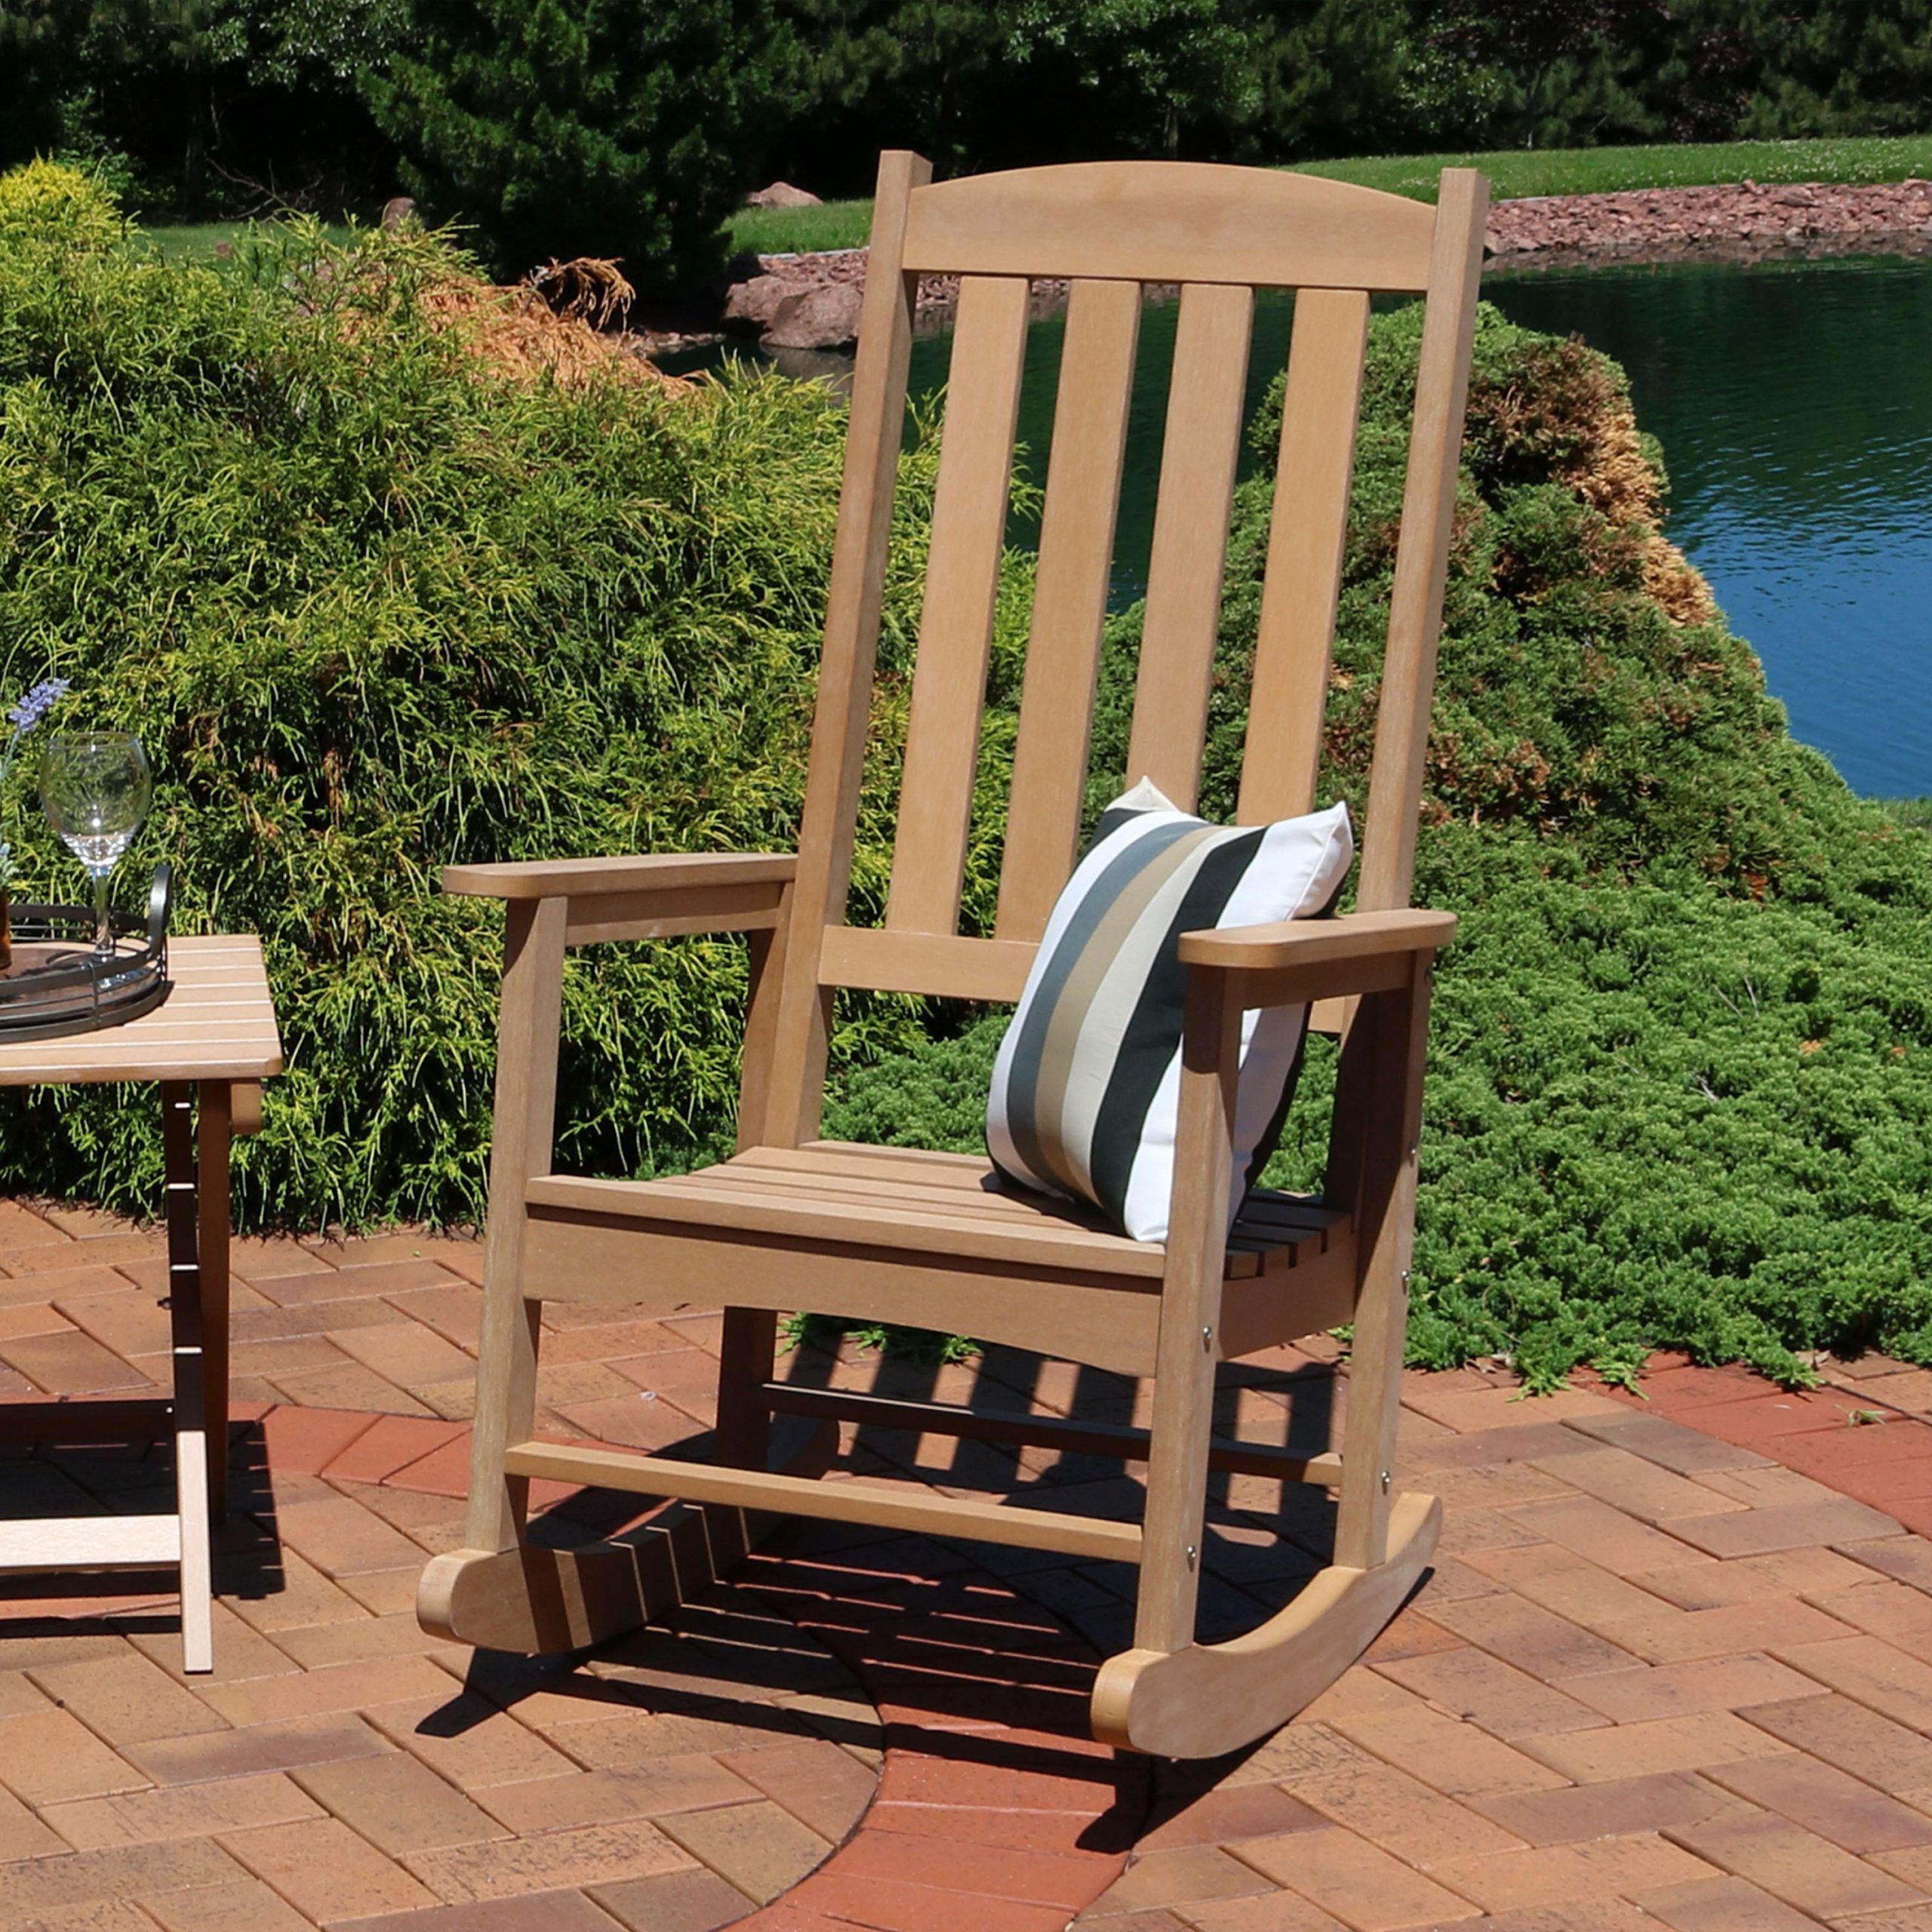 Sunnydaze All Weather Rocking Chair With Faux Wood Design, Multiple For Well Known Wood Outdoor Armchair Sets (View 15 of 15)